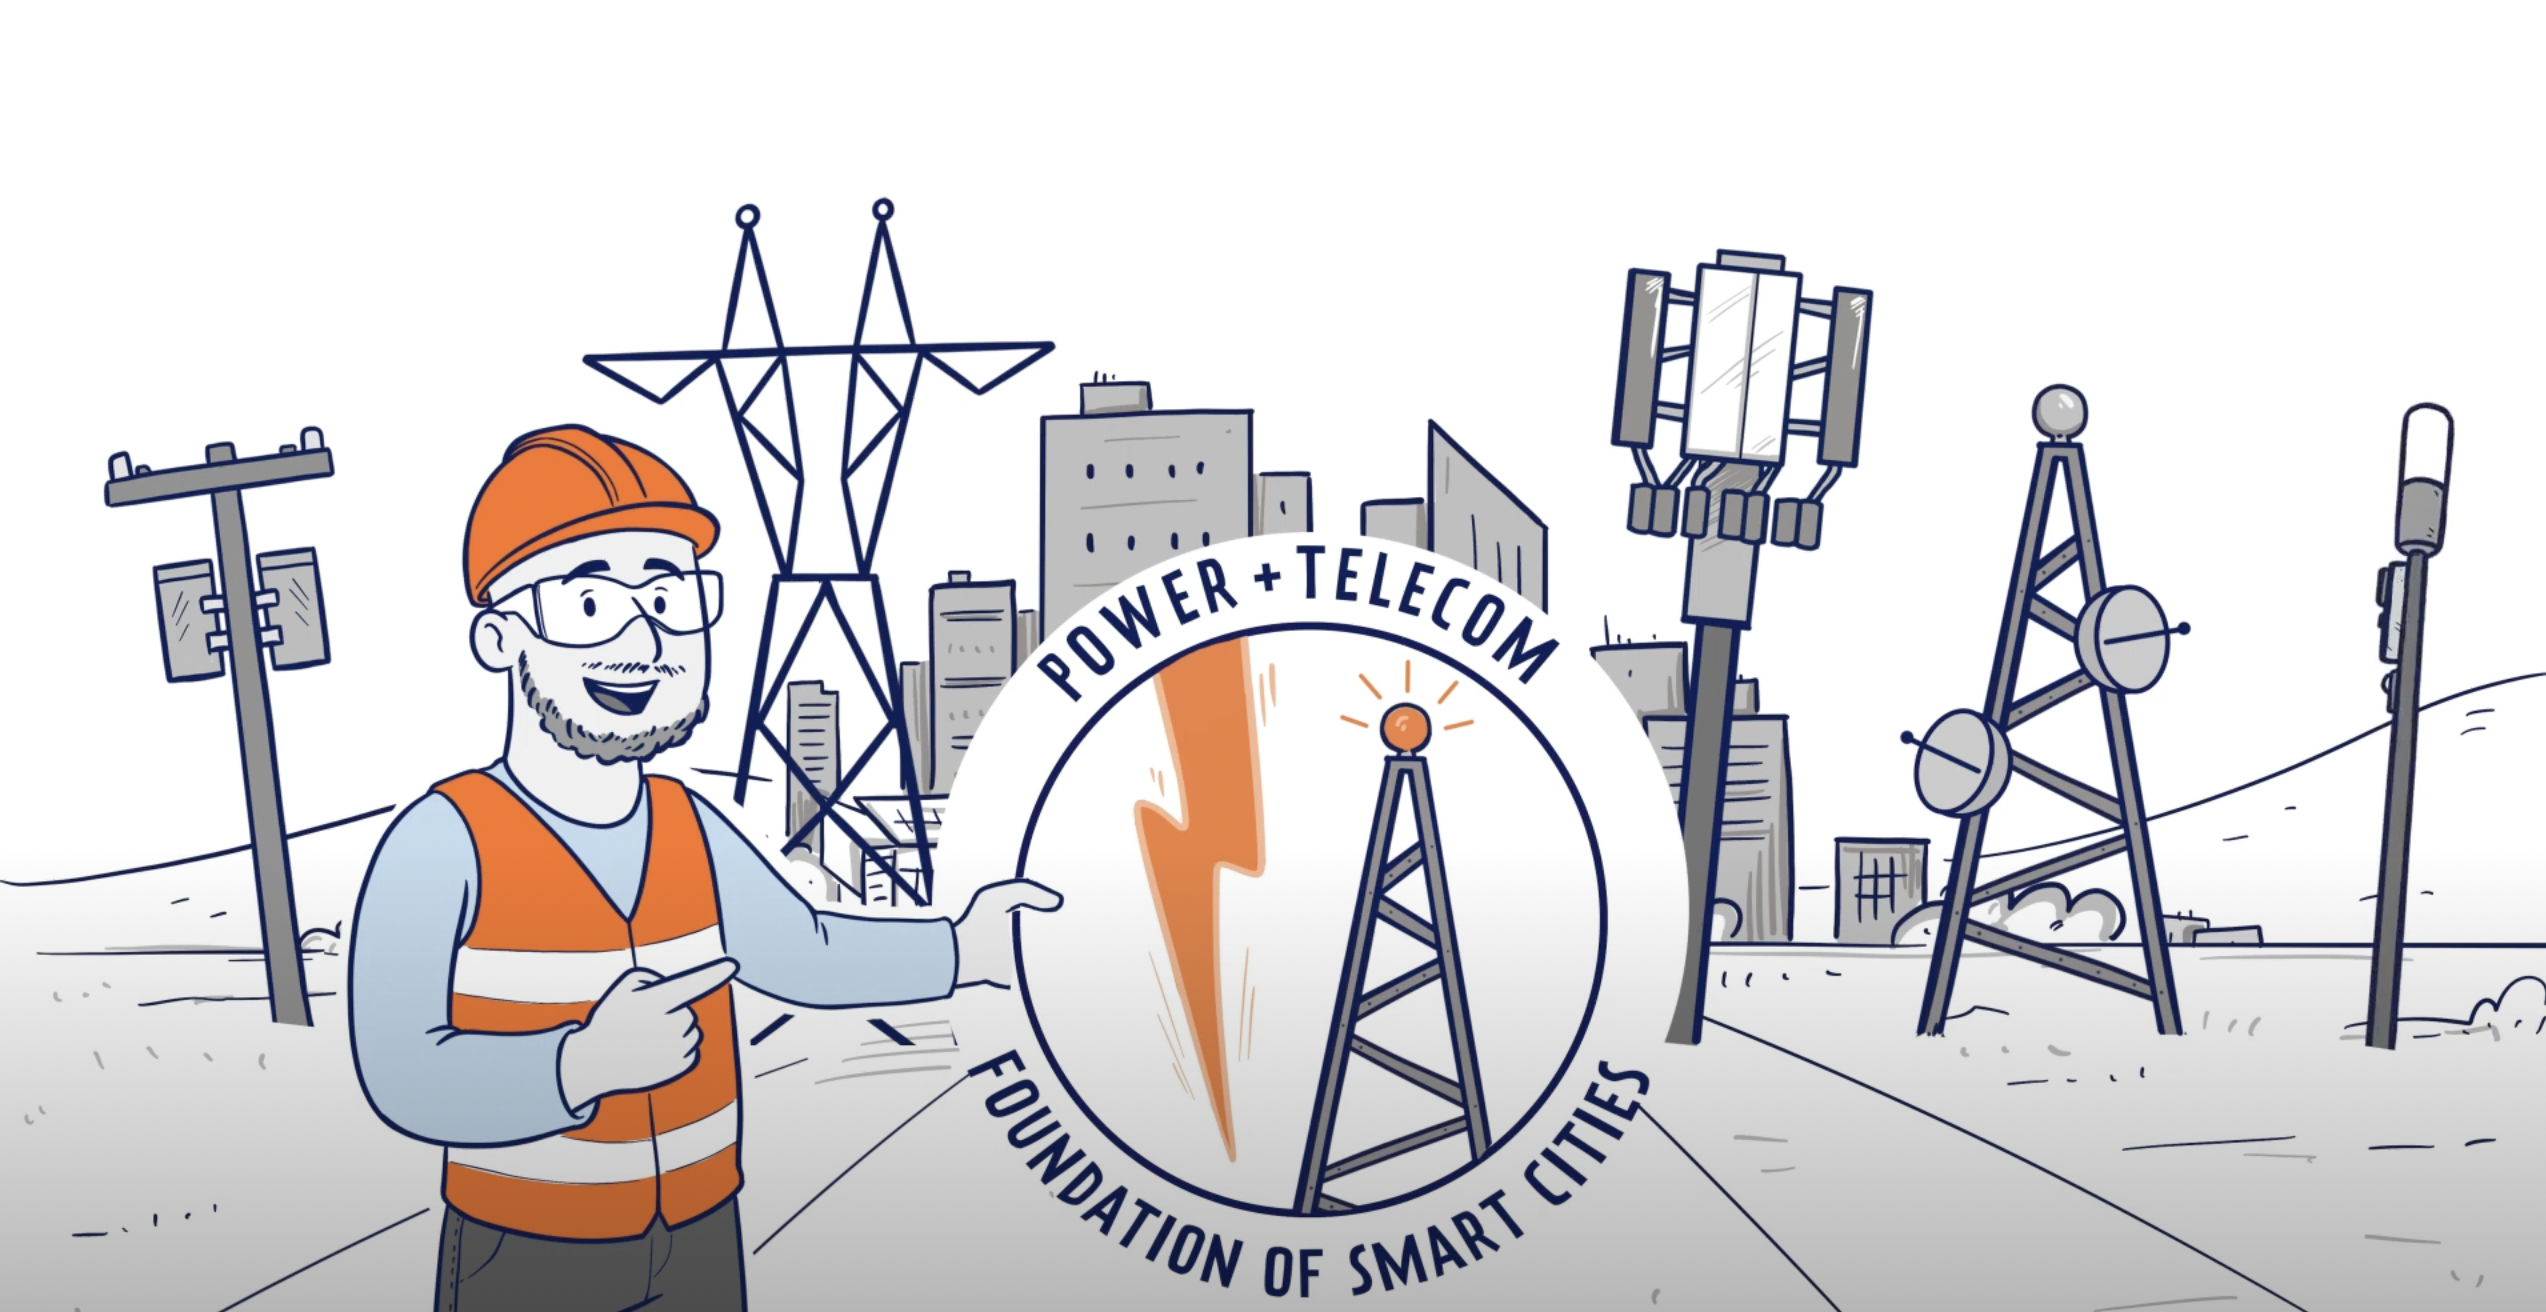 Cartoon animated male in a hard hat and safety vest holding an electric company's logo. There is the view of a city and electric lines in the background.